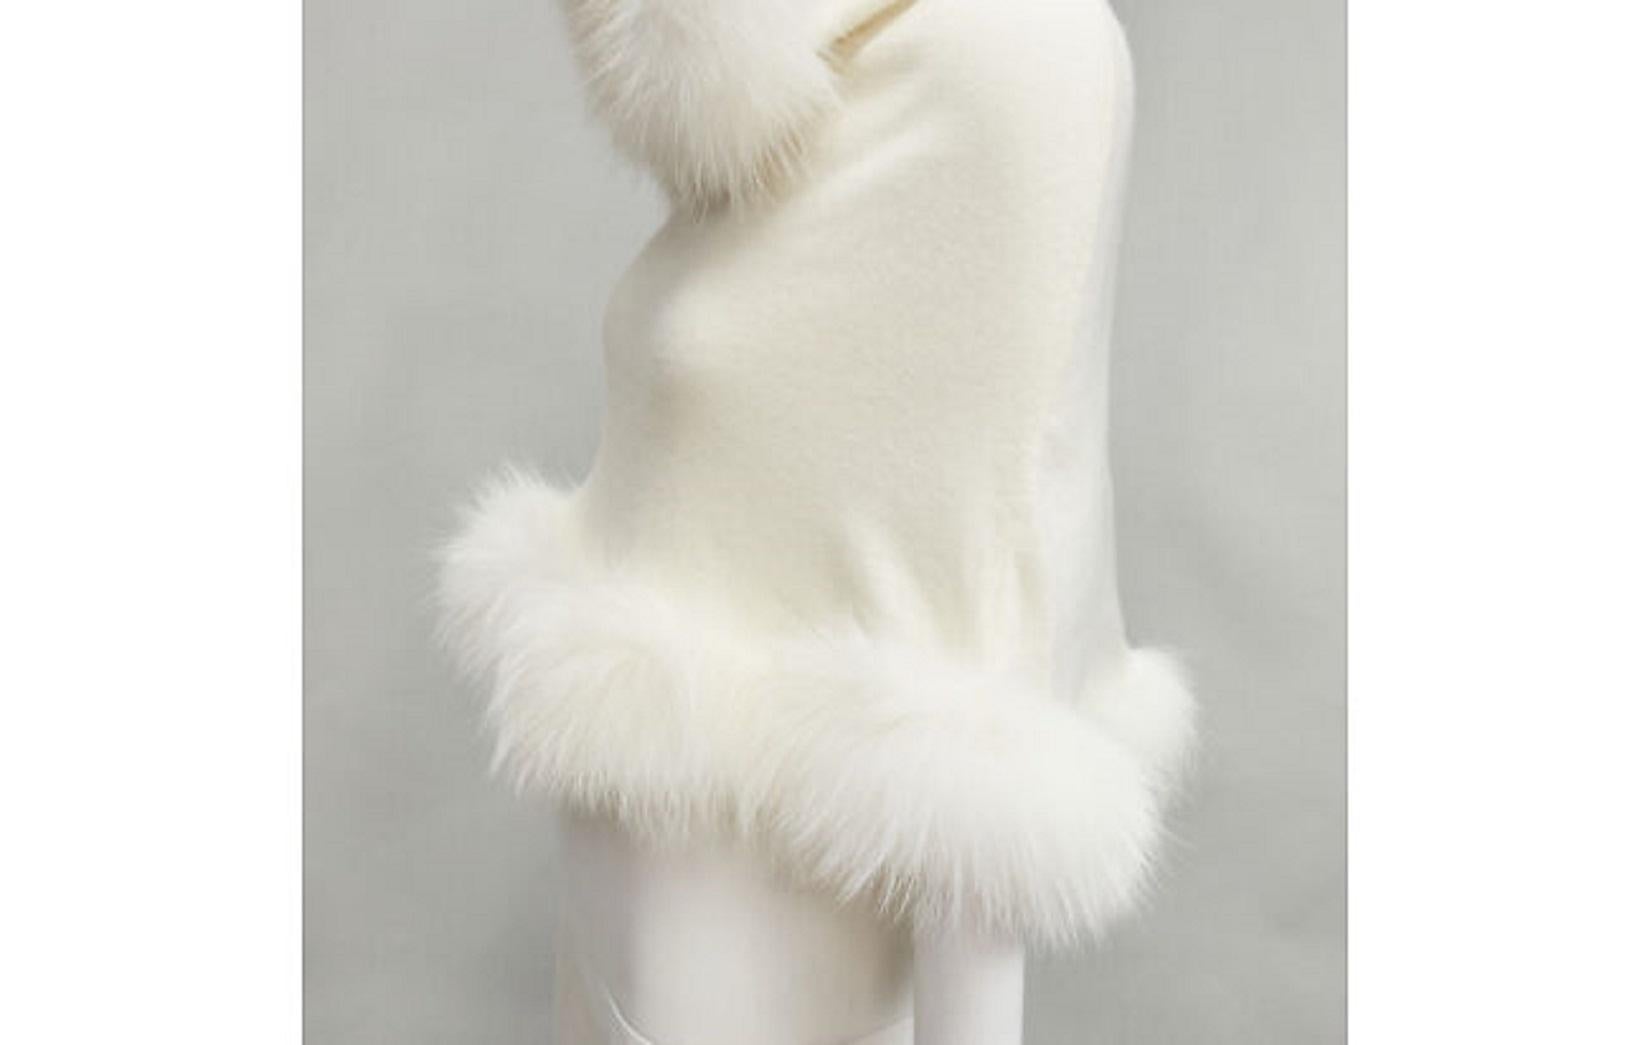 ELIE SAAB cream cashmere white fur trim knitted hooded poncho cape
Reference: AAWC/A00229
Brand: Elie Saab
Material: Wool, Cashmere
Color: Beige
Pattern: Solid
Extra Details: Fur trim along hood and hem.
Made in: Italy

CONDITION:
Condition: